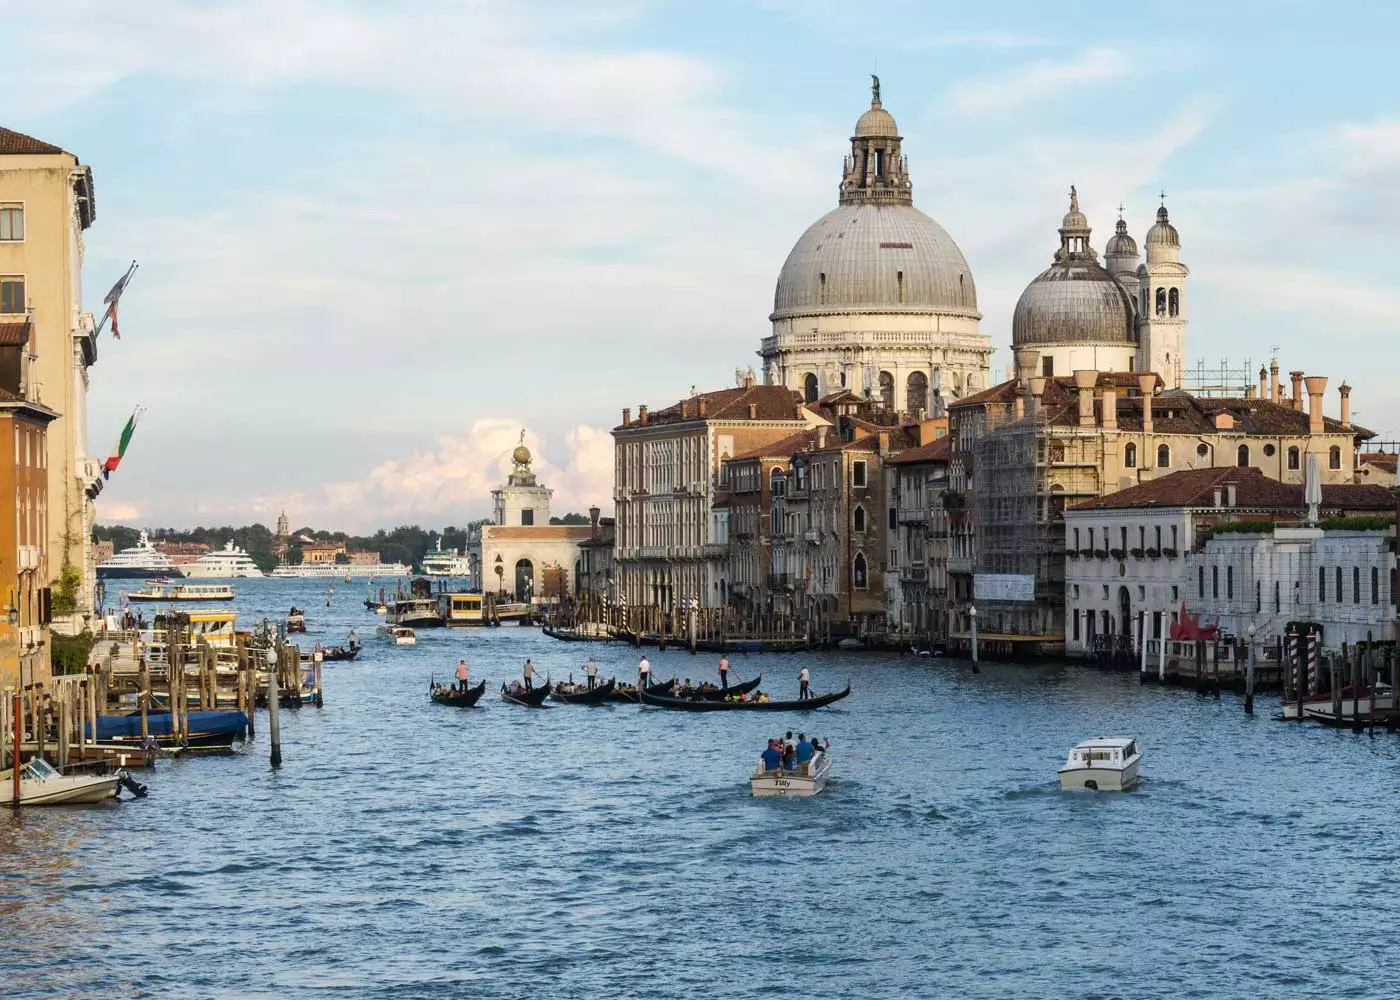 Venice sights: the most beautiful things to do and places you must see